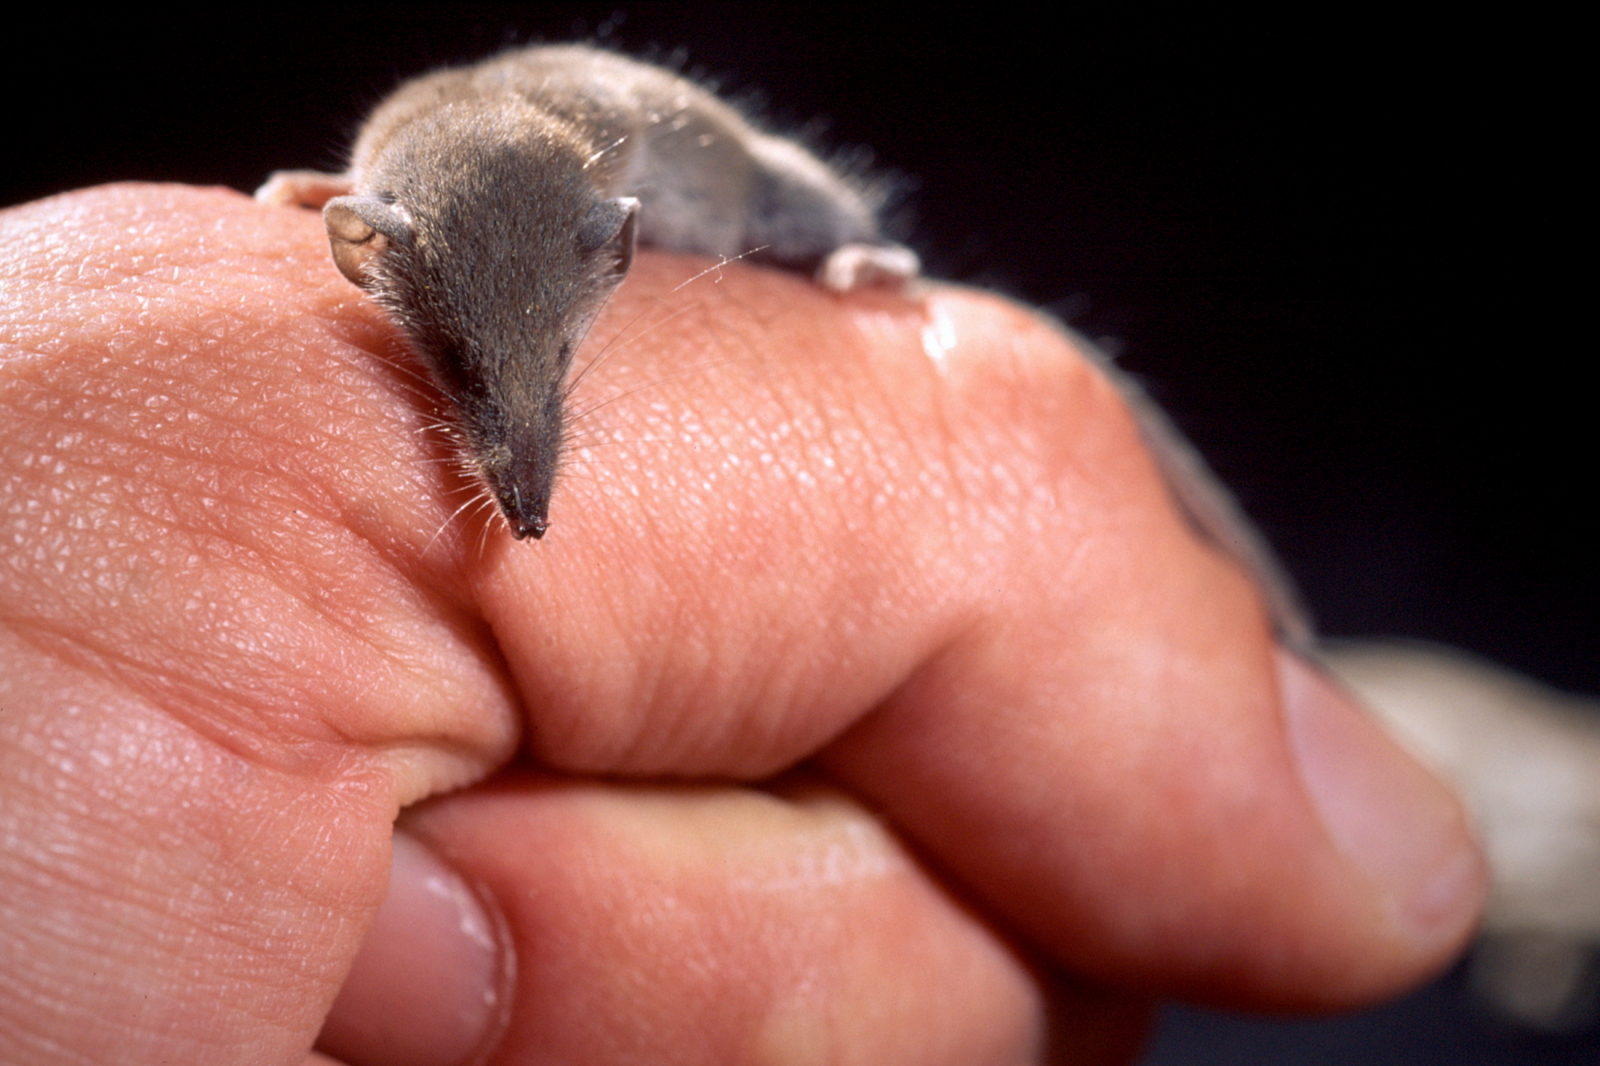 Name the smallest mammal of the world.